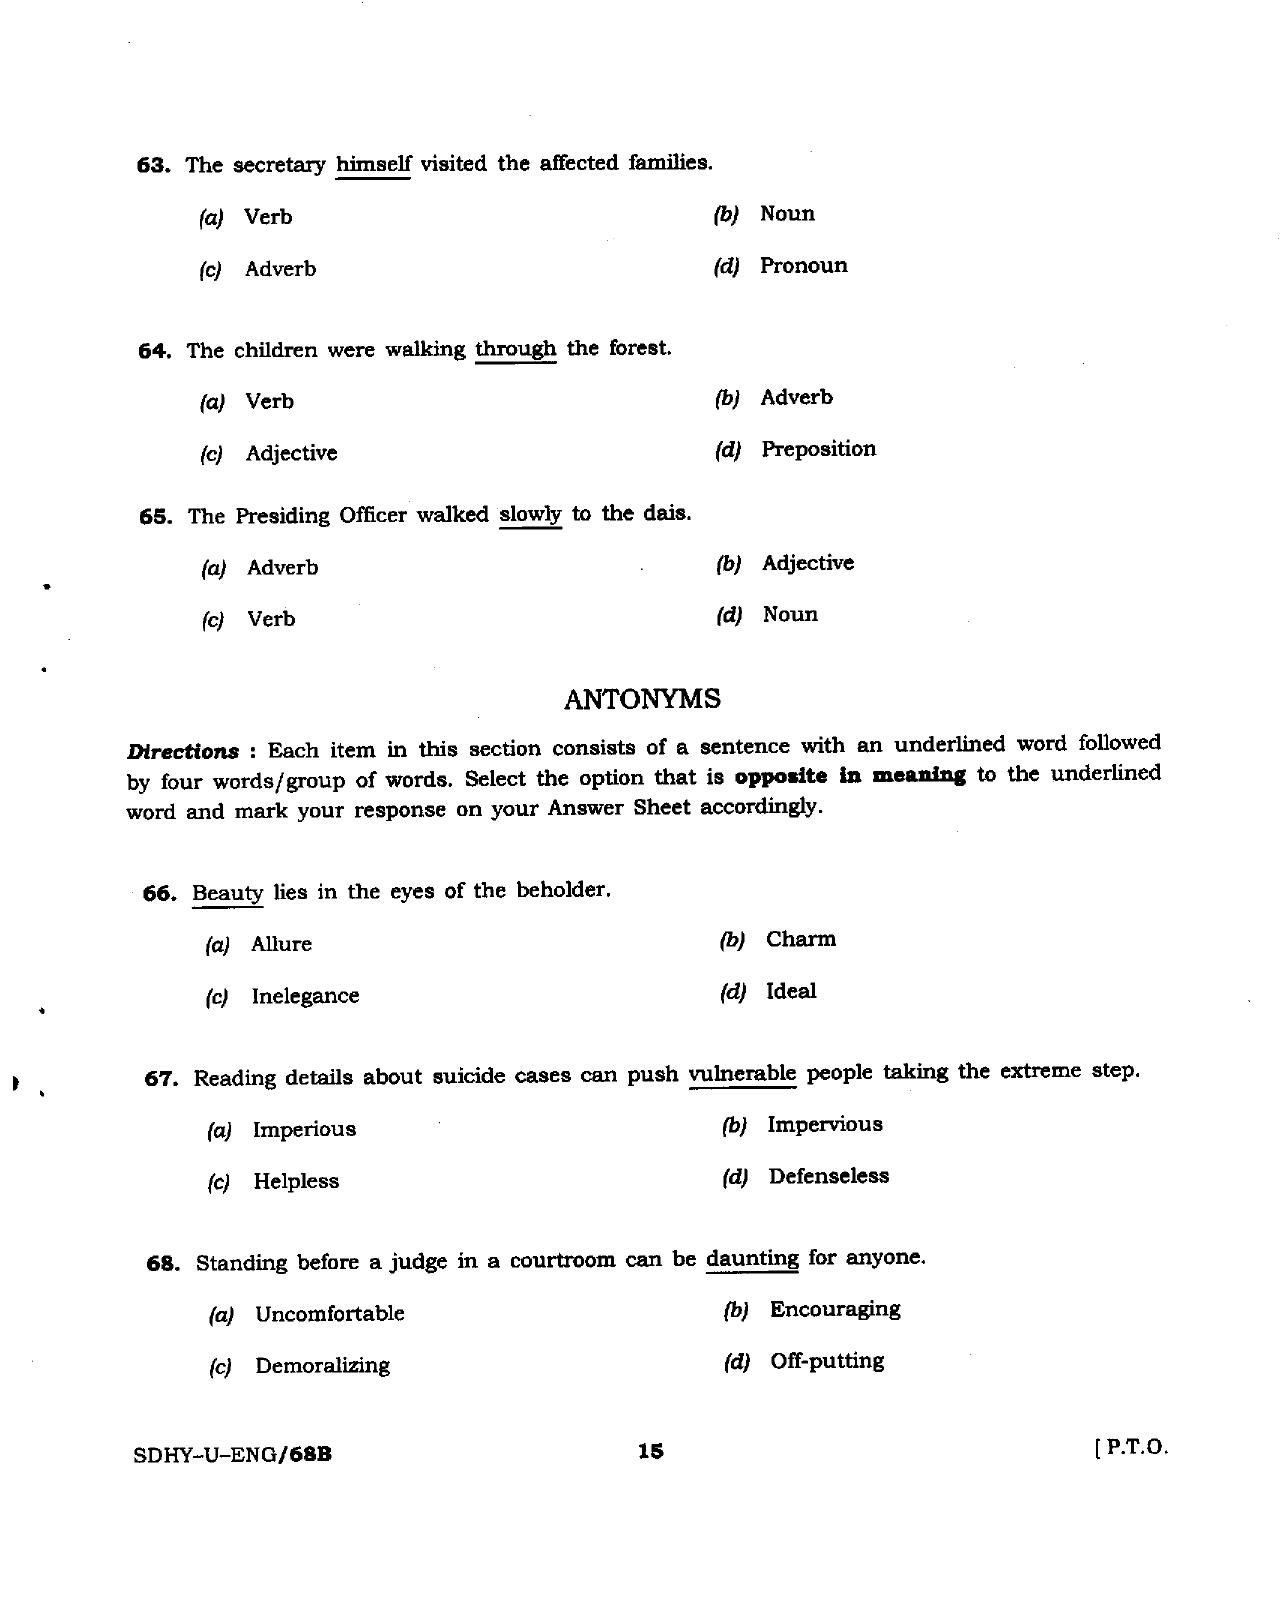 Patna High Court District Judge Previous Question Papers PDF for the English Language - Page 15